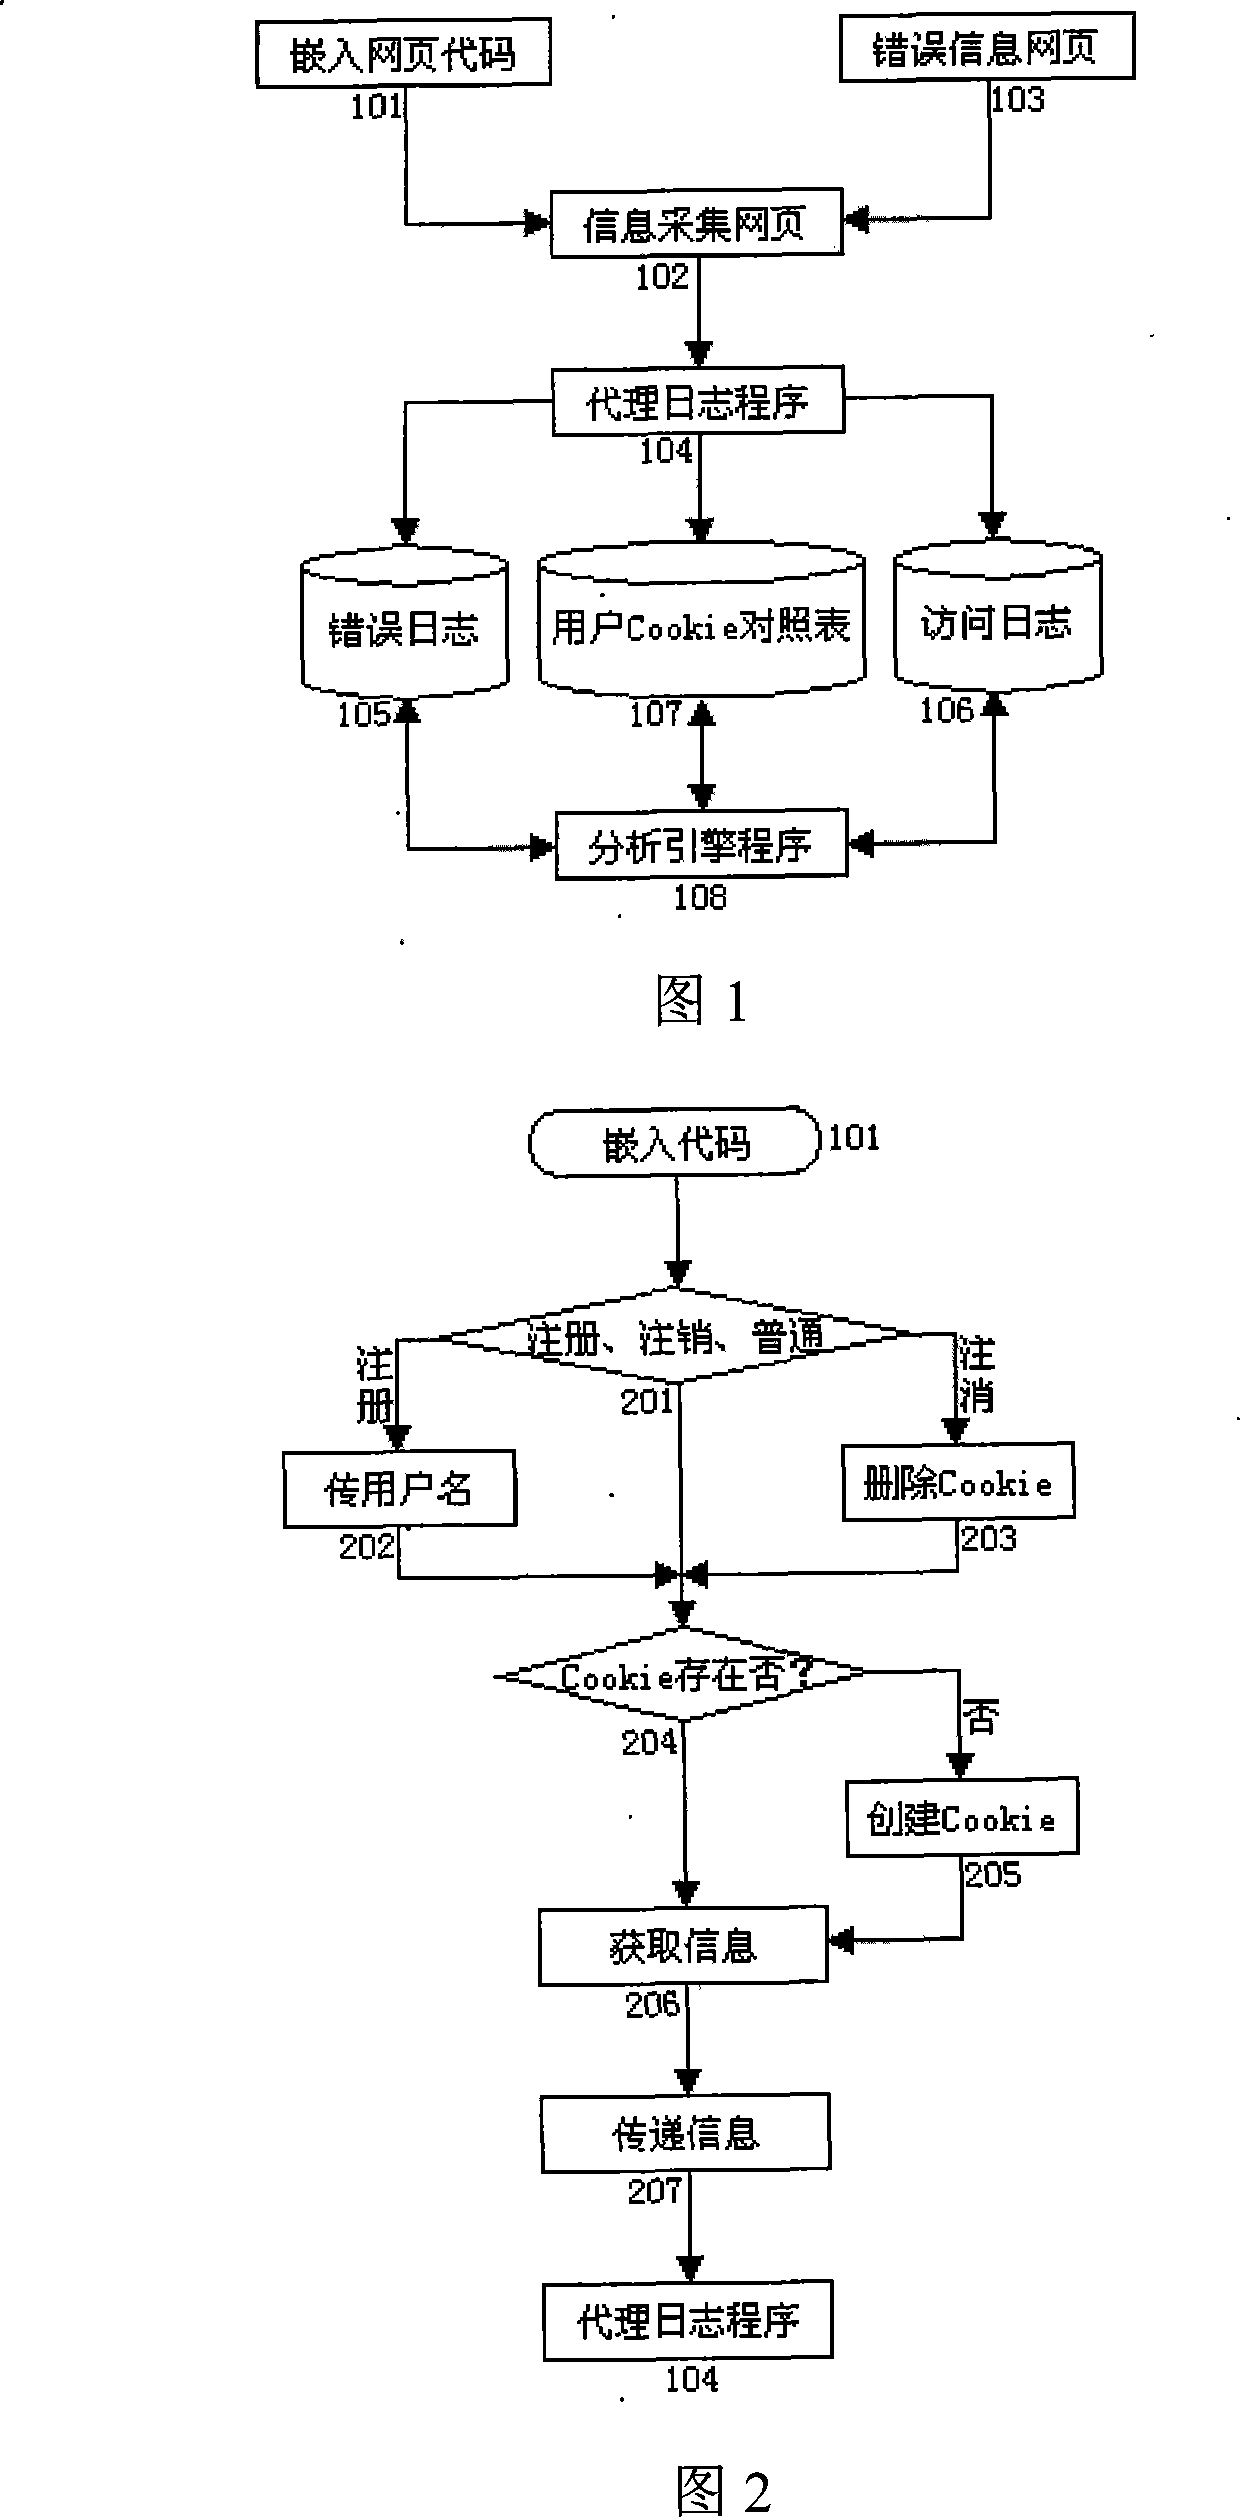 Website access analysis system and method based on built-in code proxy log